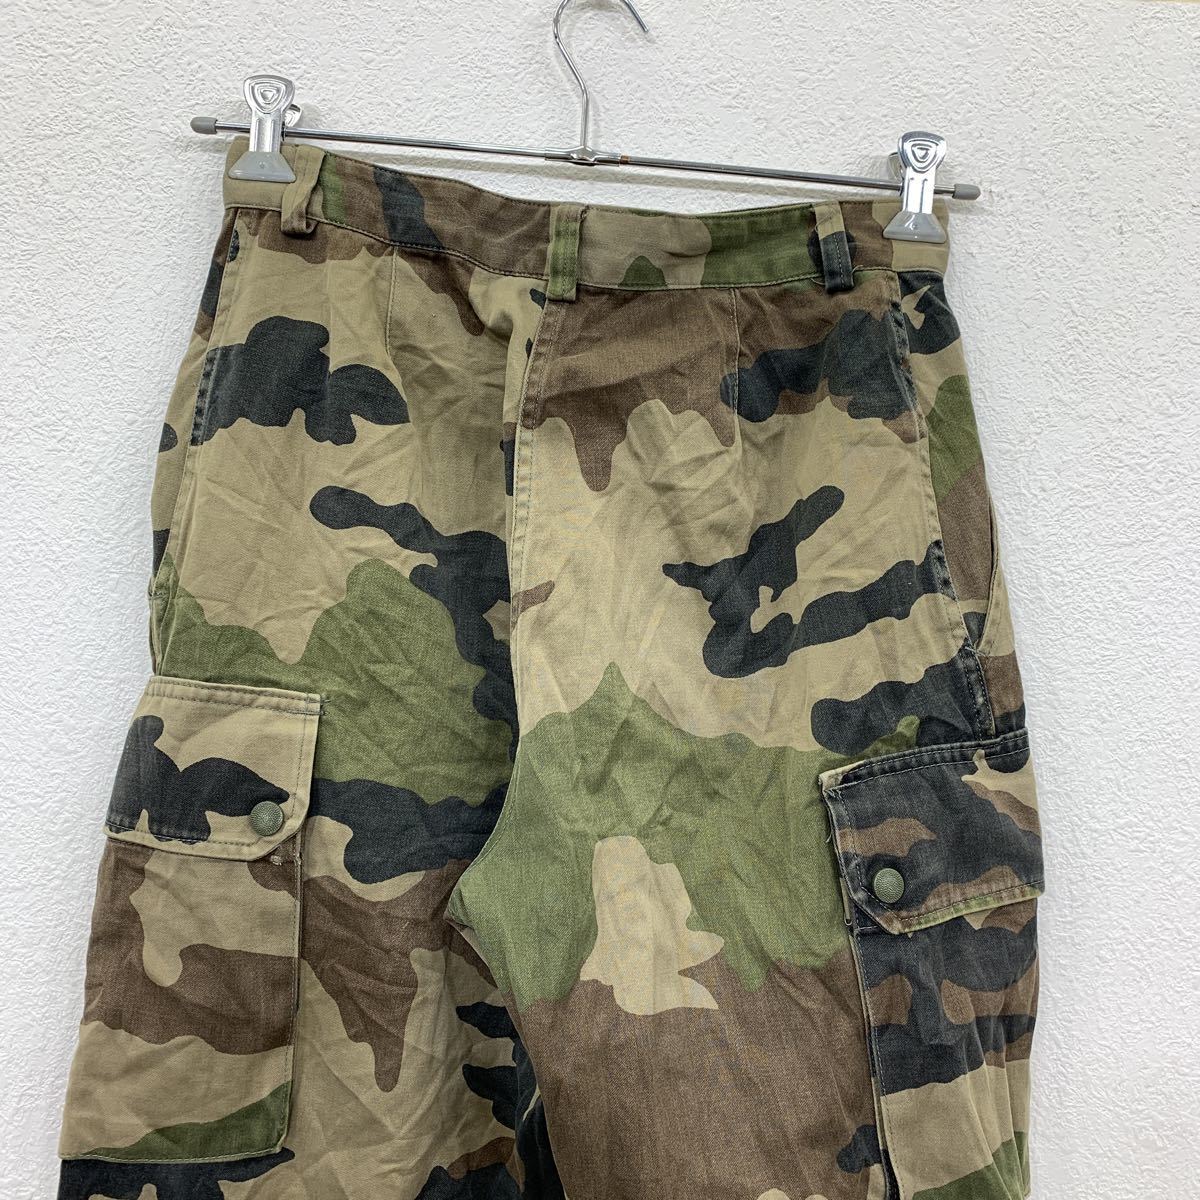  cargo pants W28 camouflage camouflage total pattern khaki olive color old clothes . America buying up 2304-1607